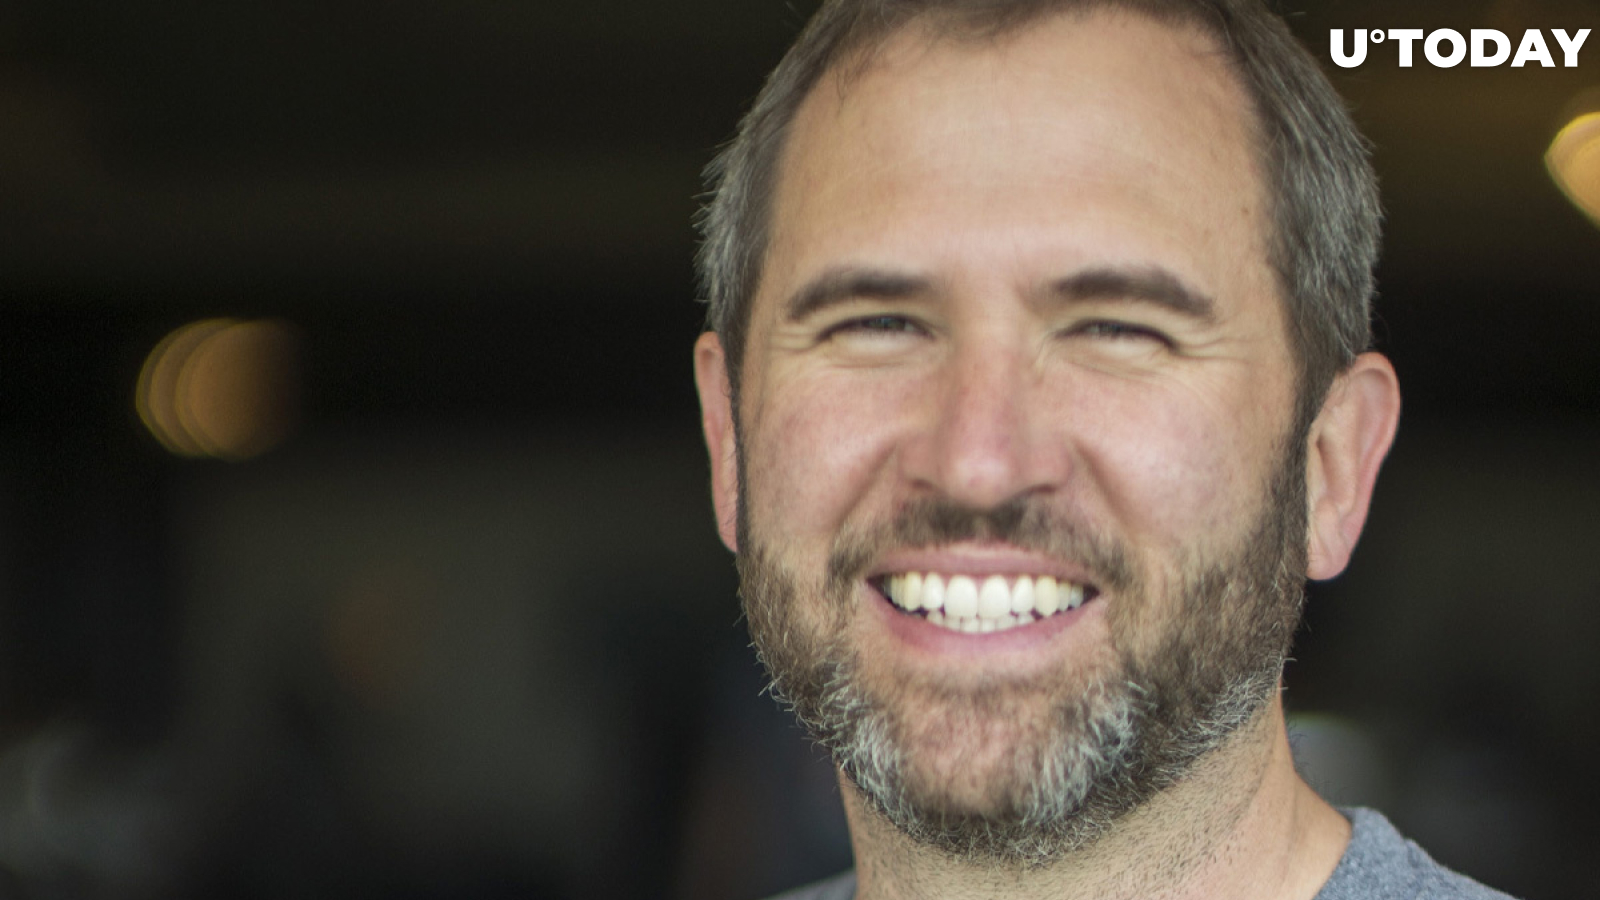 Ripple Can Replace XRP with Alternative, According to CEO Brad Garlinghouse